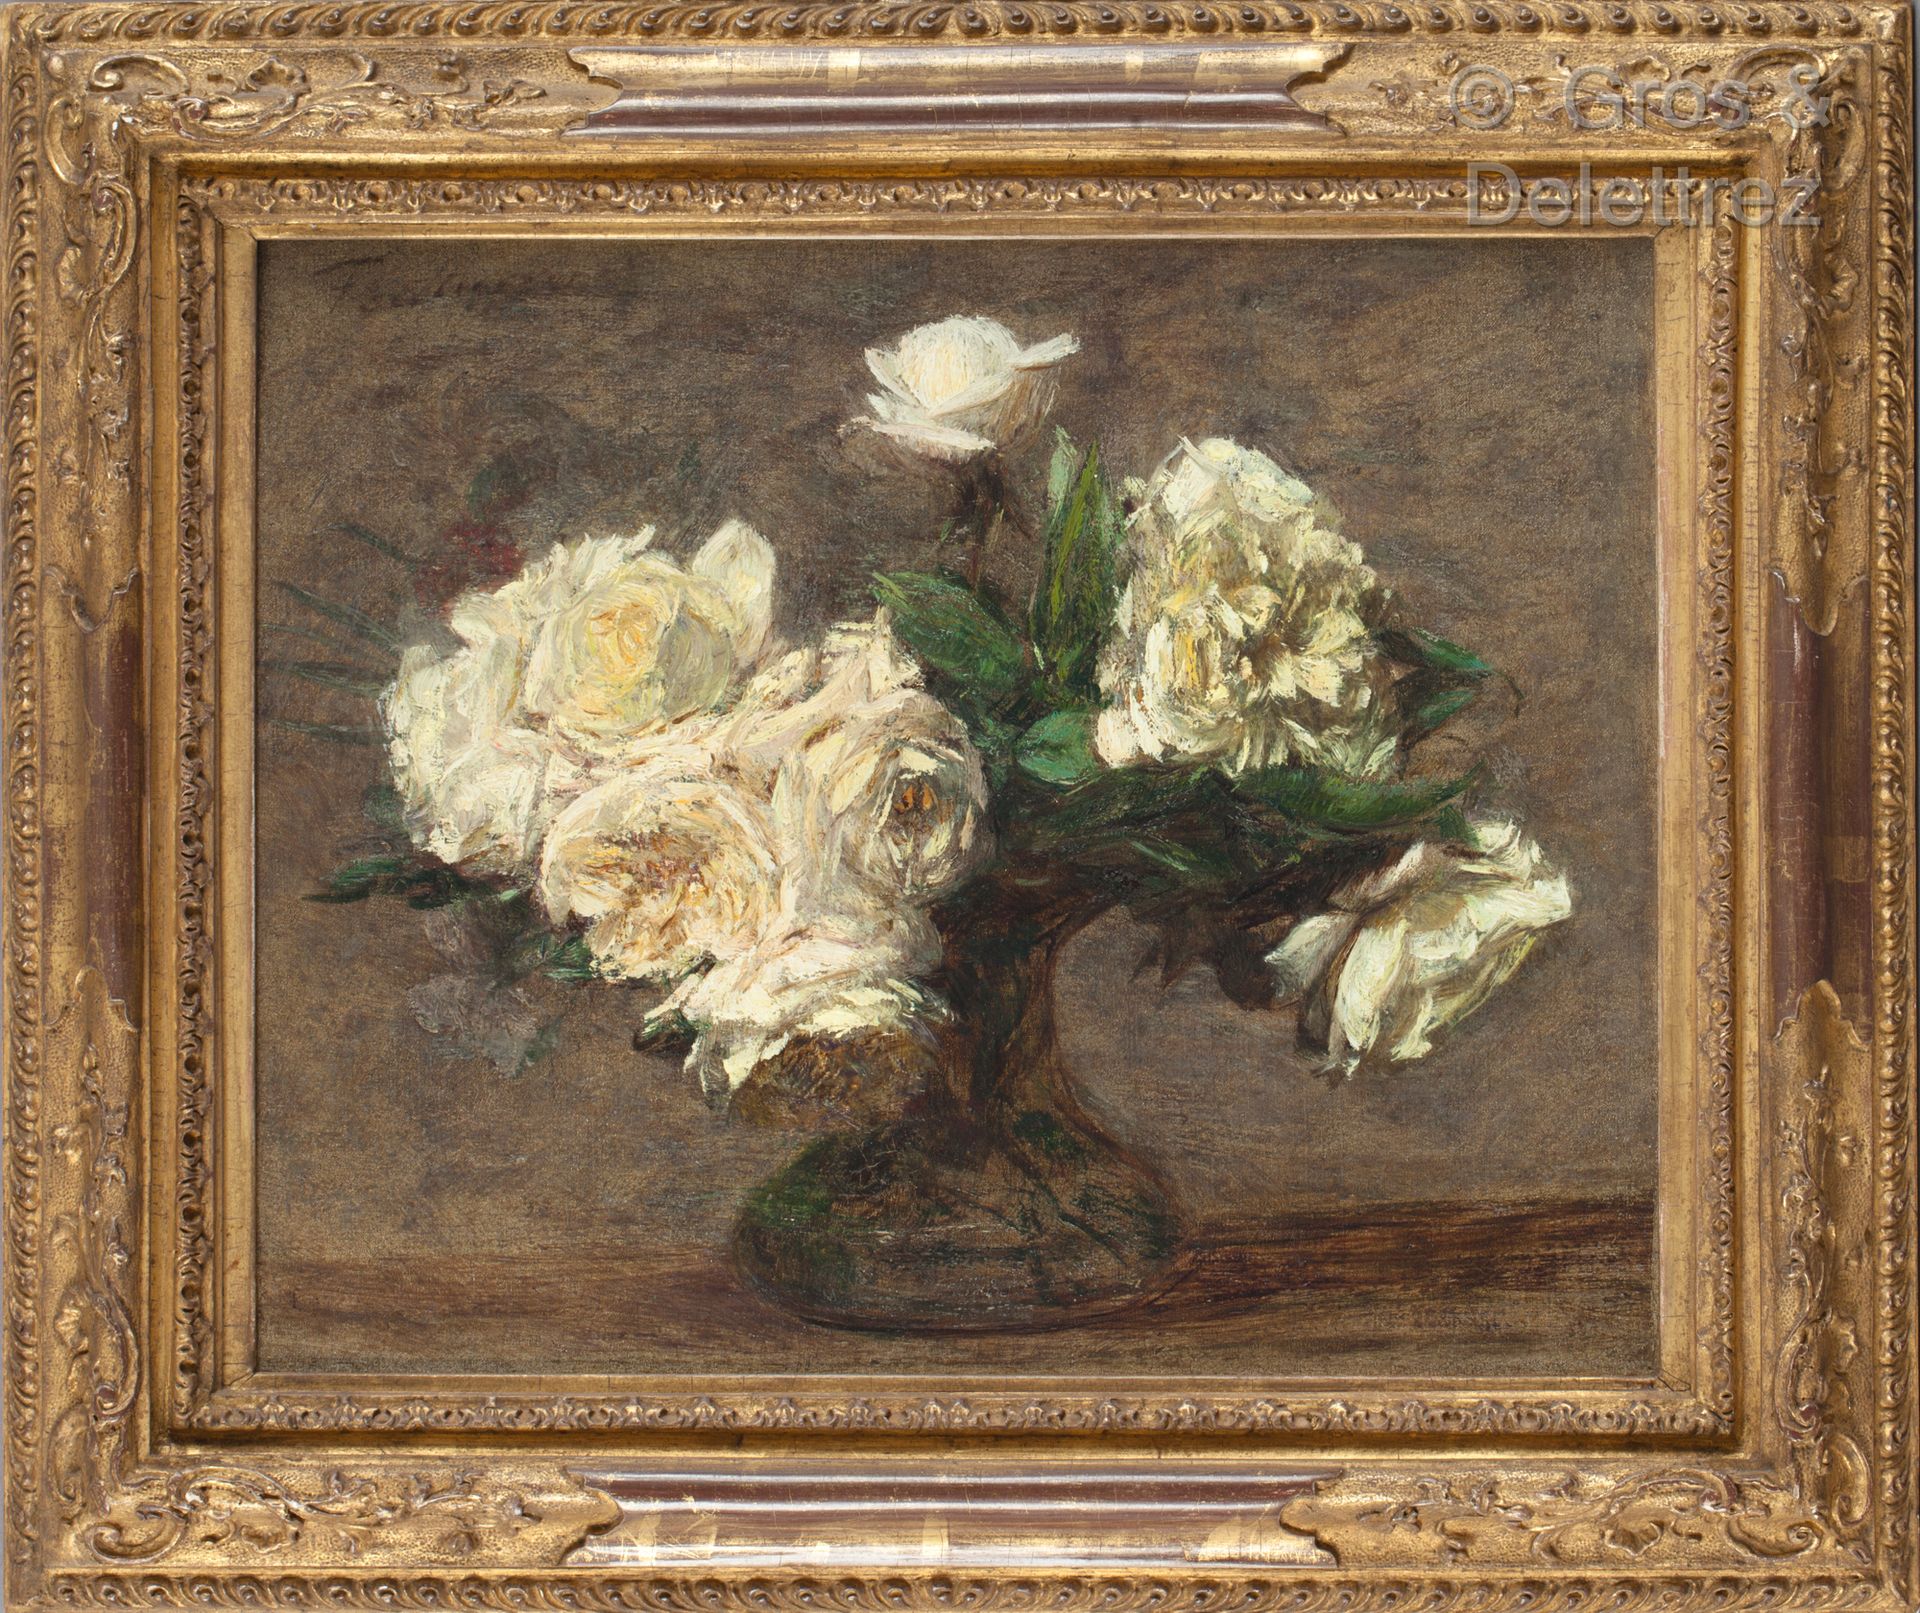 Henri-Théodore FANTIN-LATOUR (1836-1904) 
Yellow roses in a vase




Oil on canv&hellip;